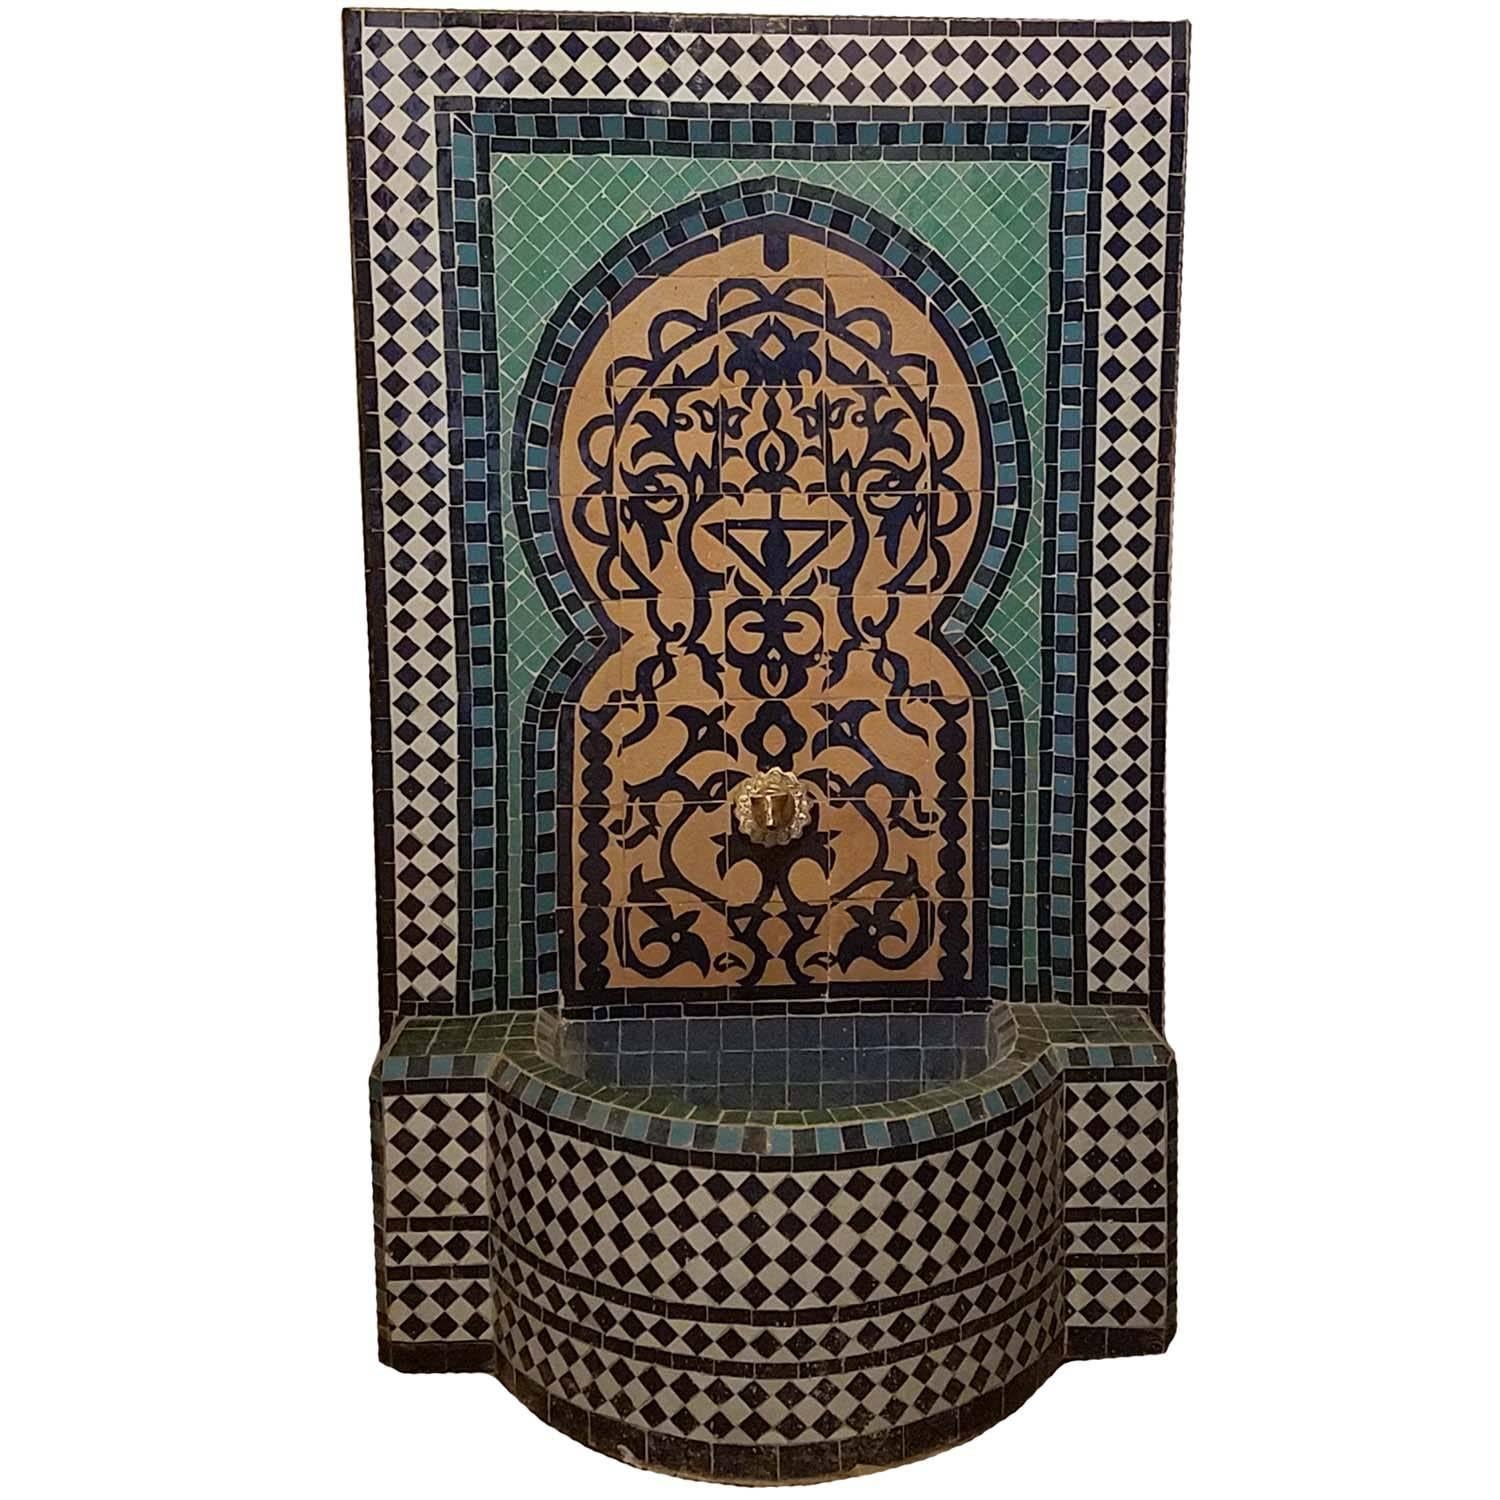 Moroccan "Tree of Life" Mosaic Fountain, All Handmade For Sale